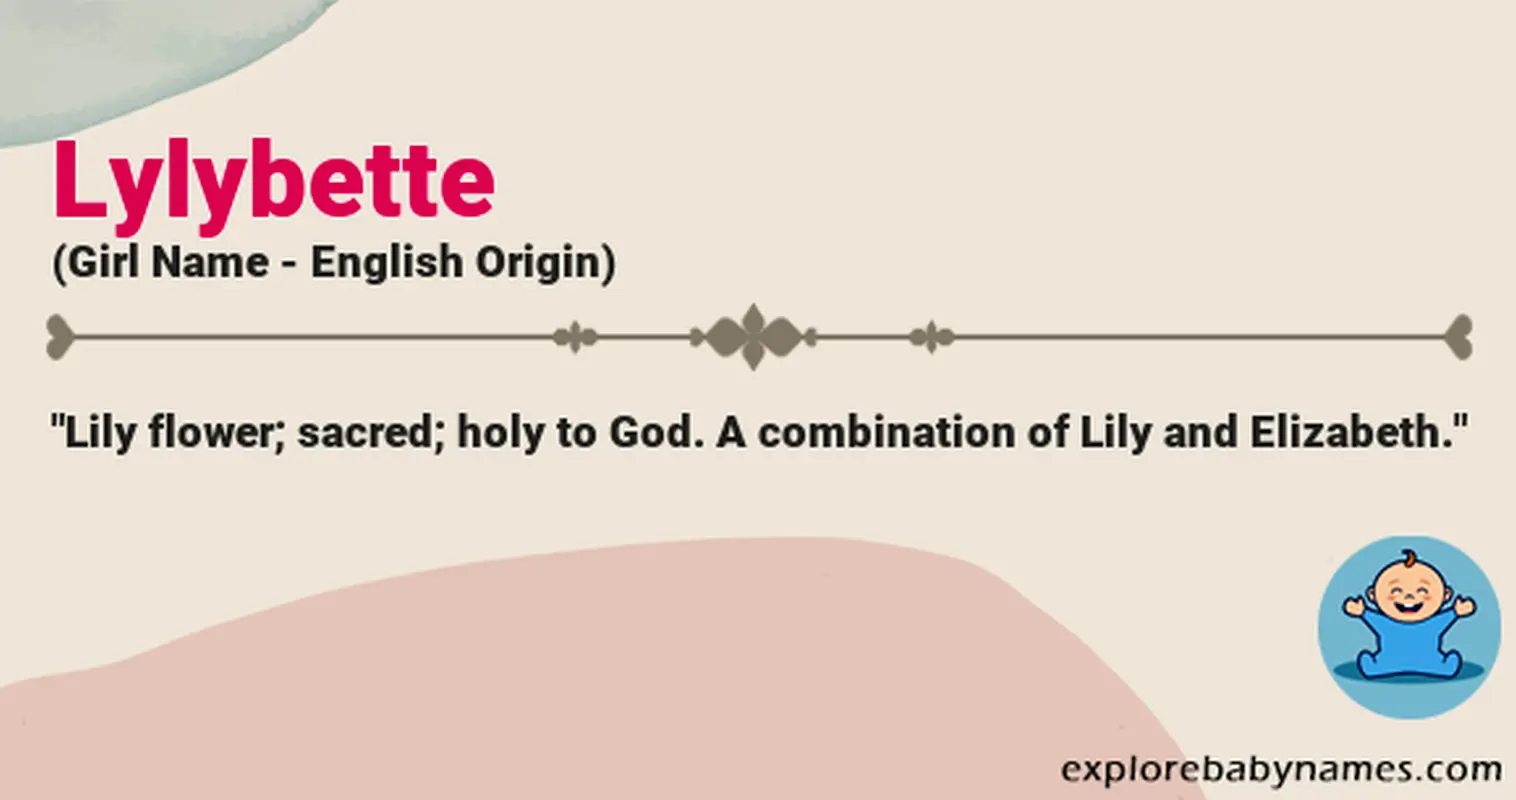 Meaning of Lylybette